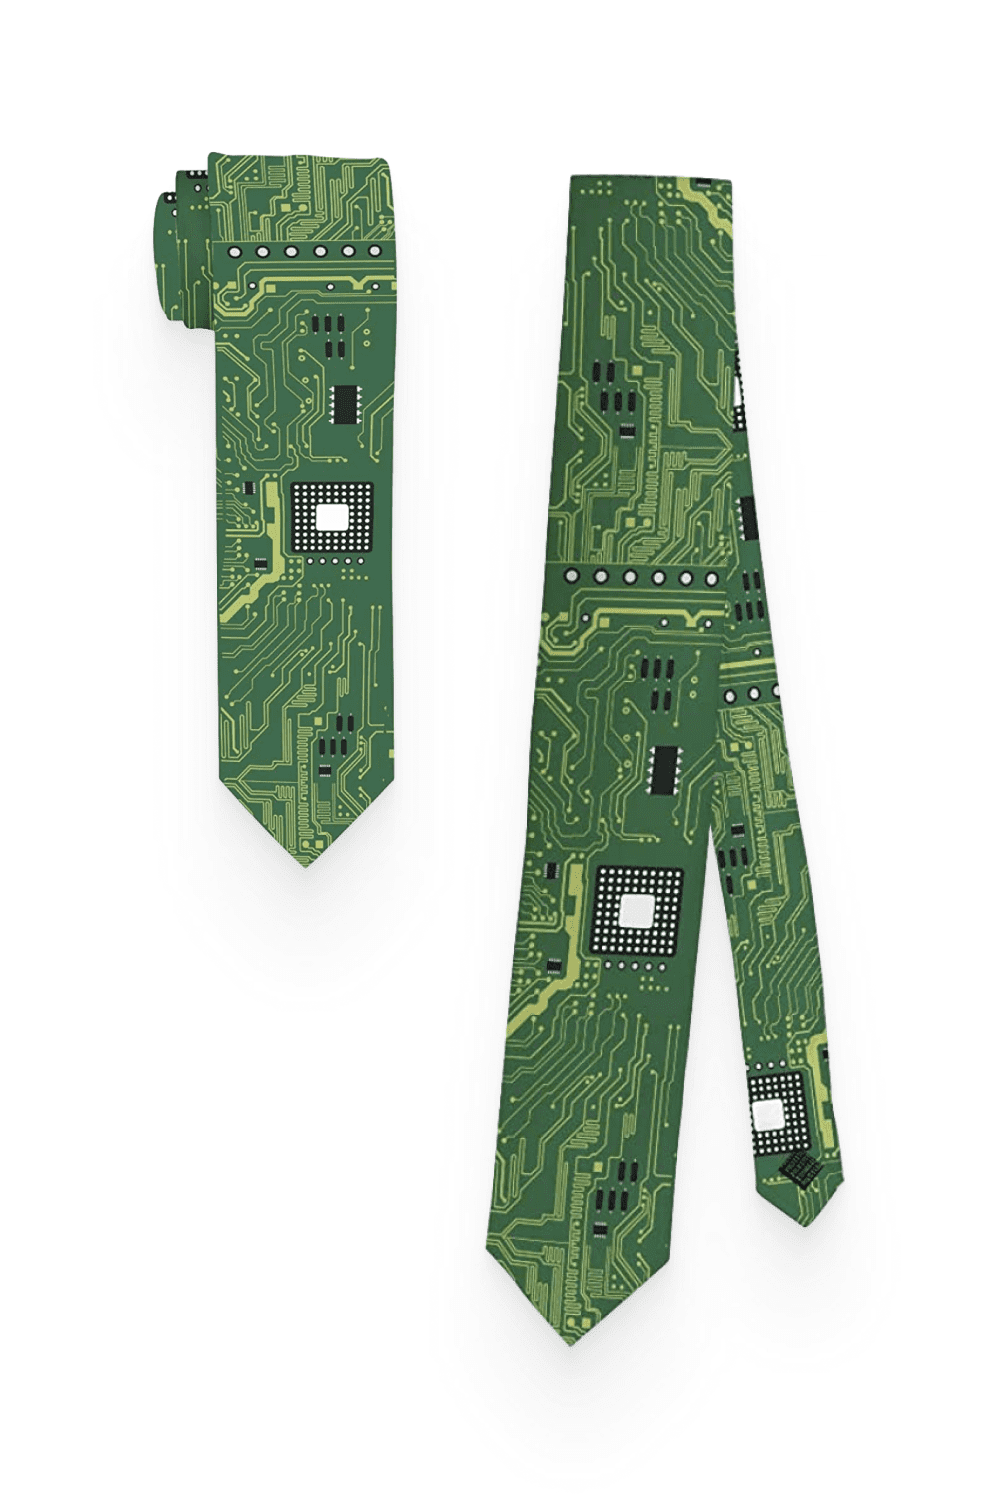 Tie with a computer print.